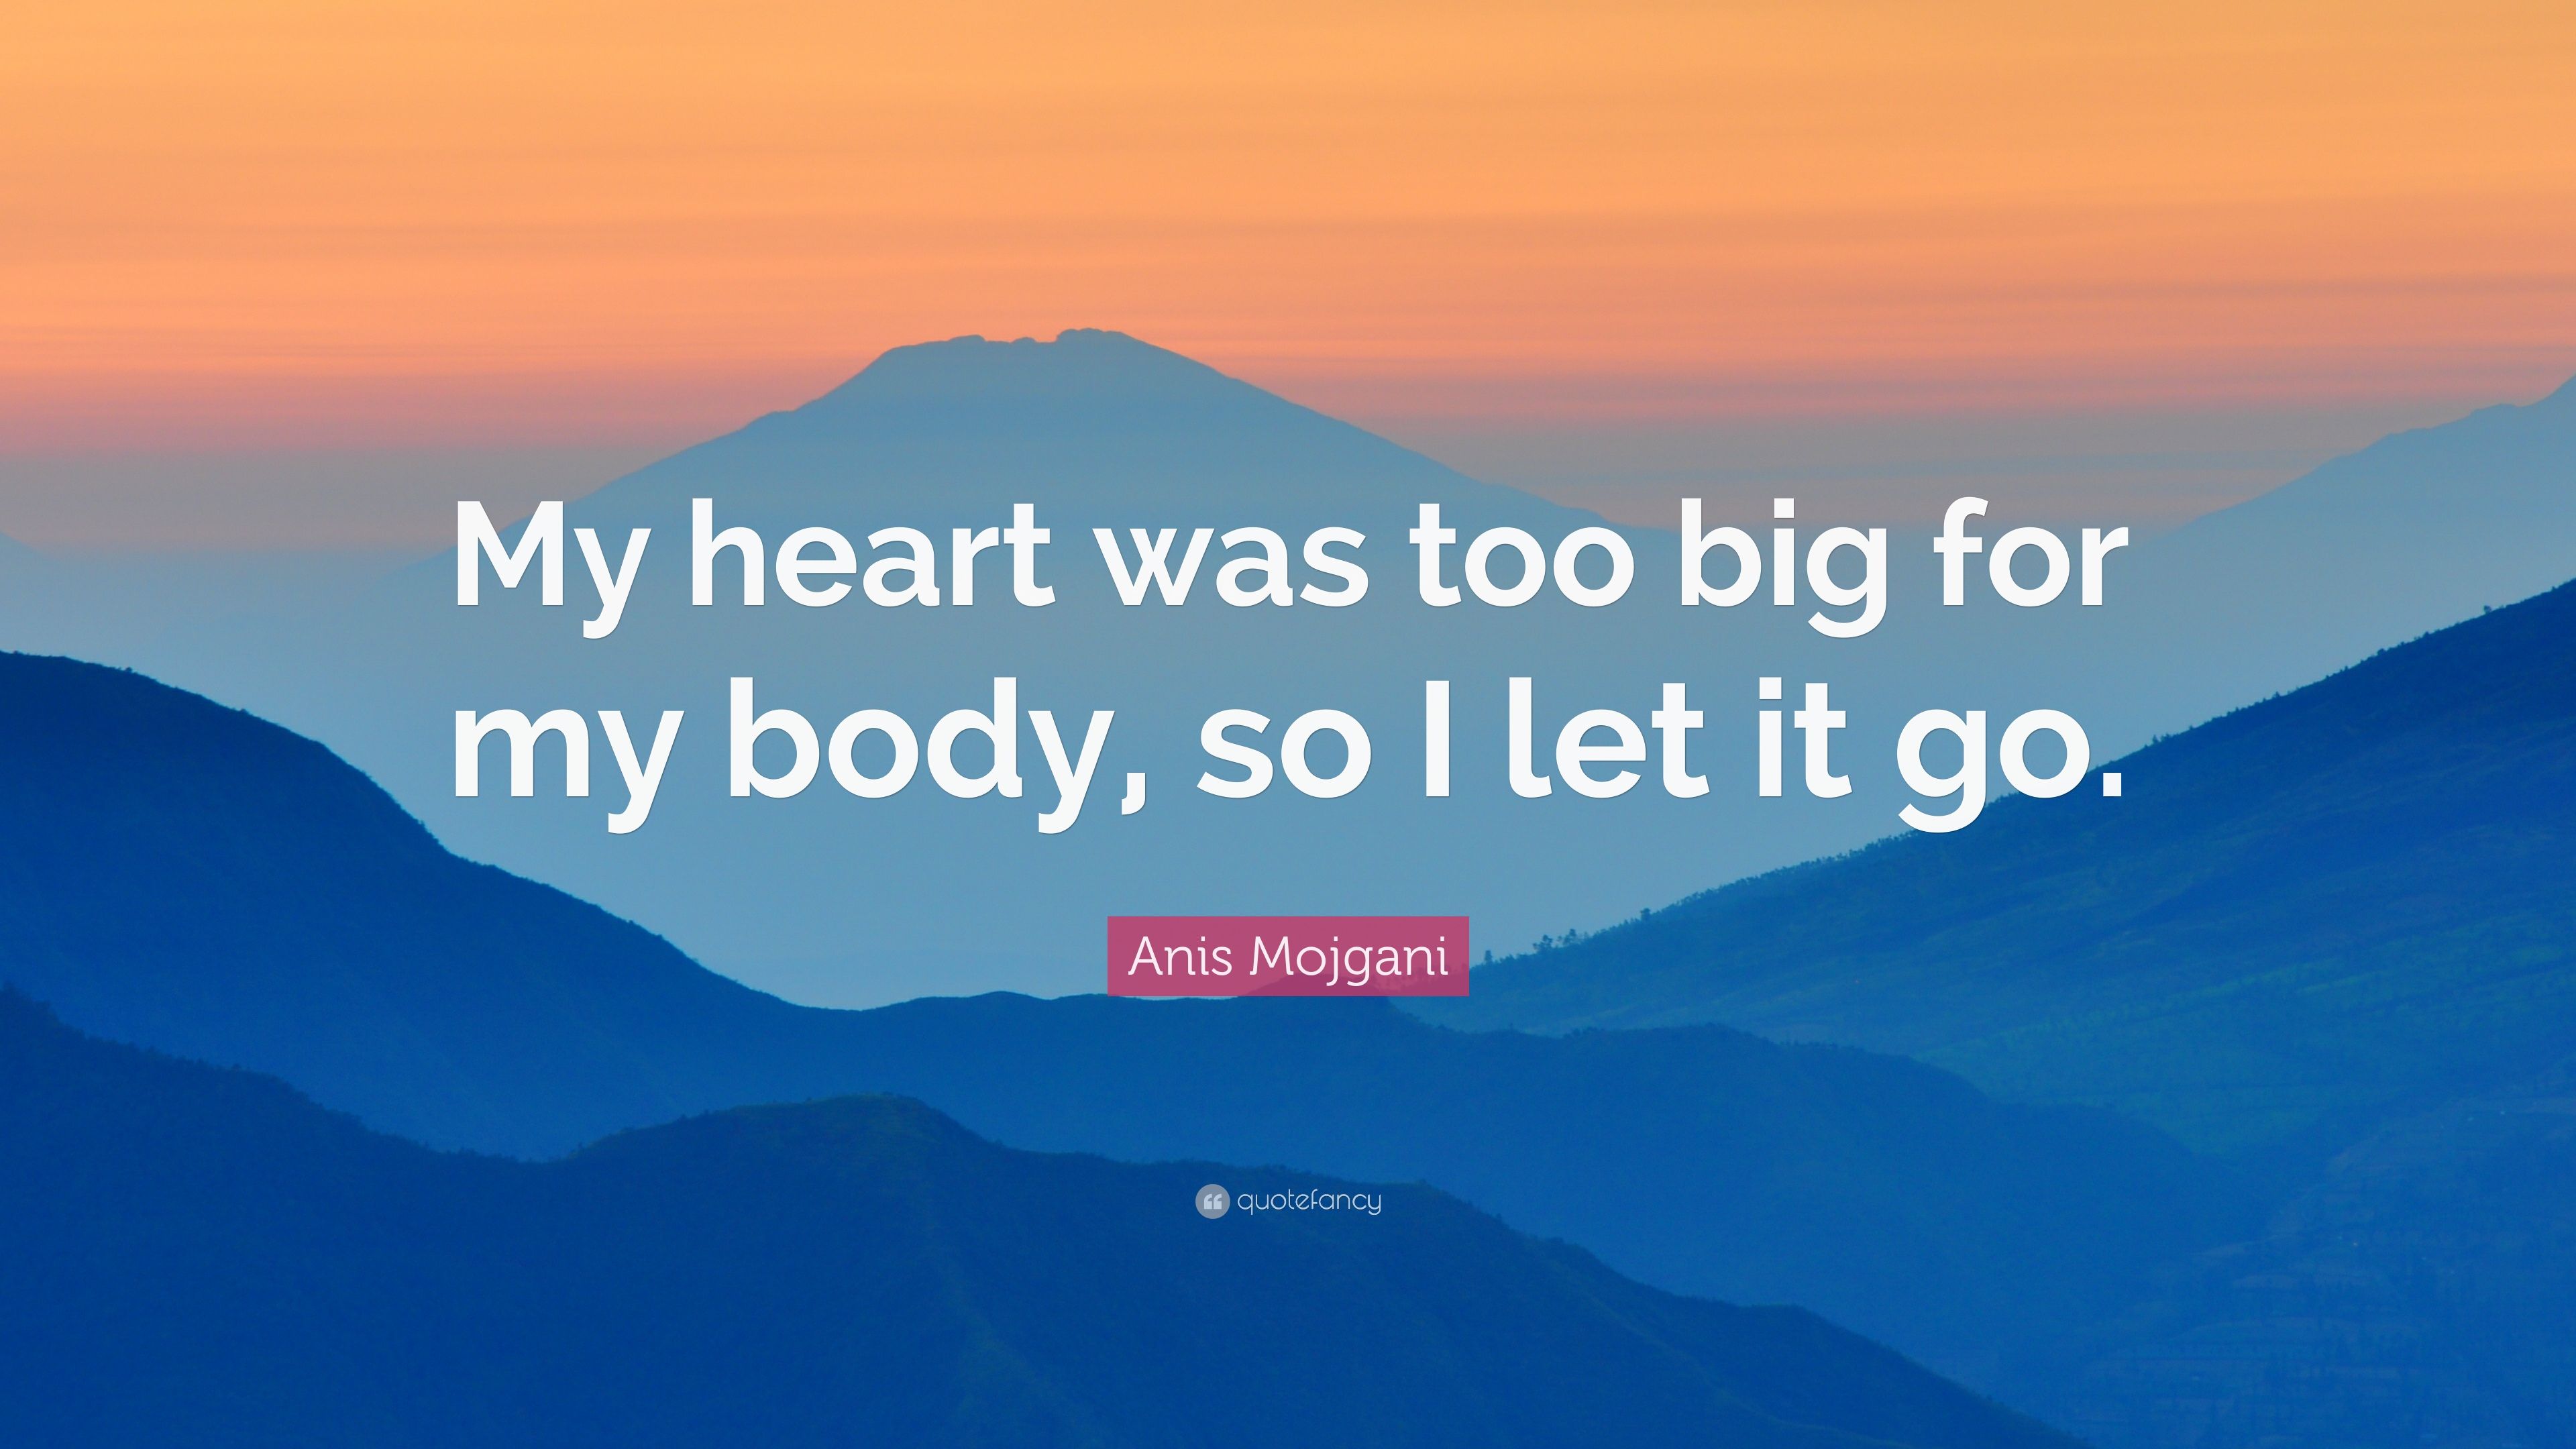 Anis Mojgani Quote: “My heart was too big for my body, so I let it go.” (7 wallpaper)